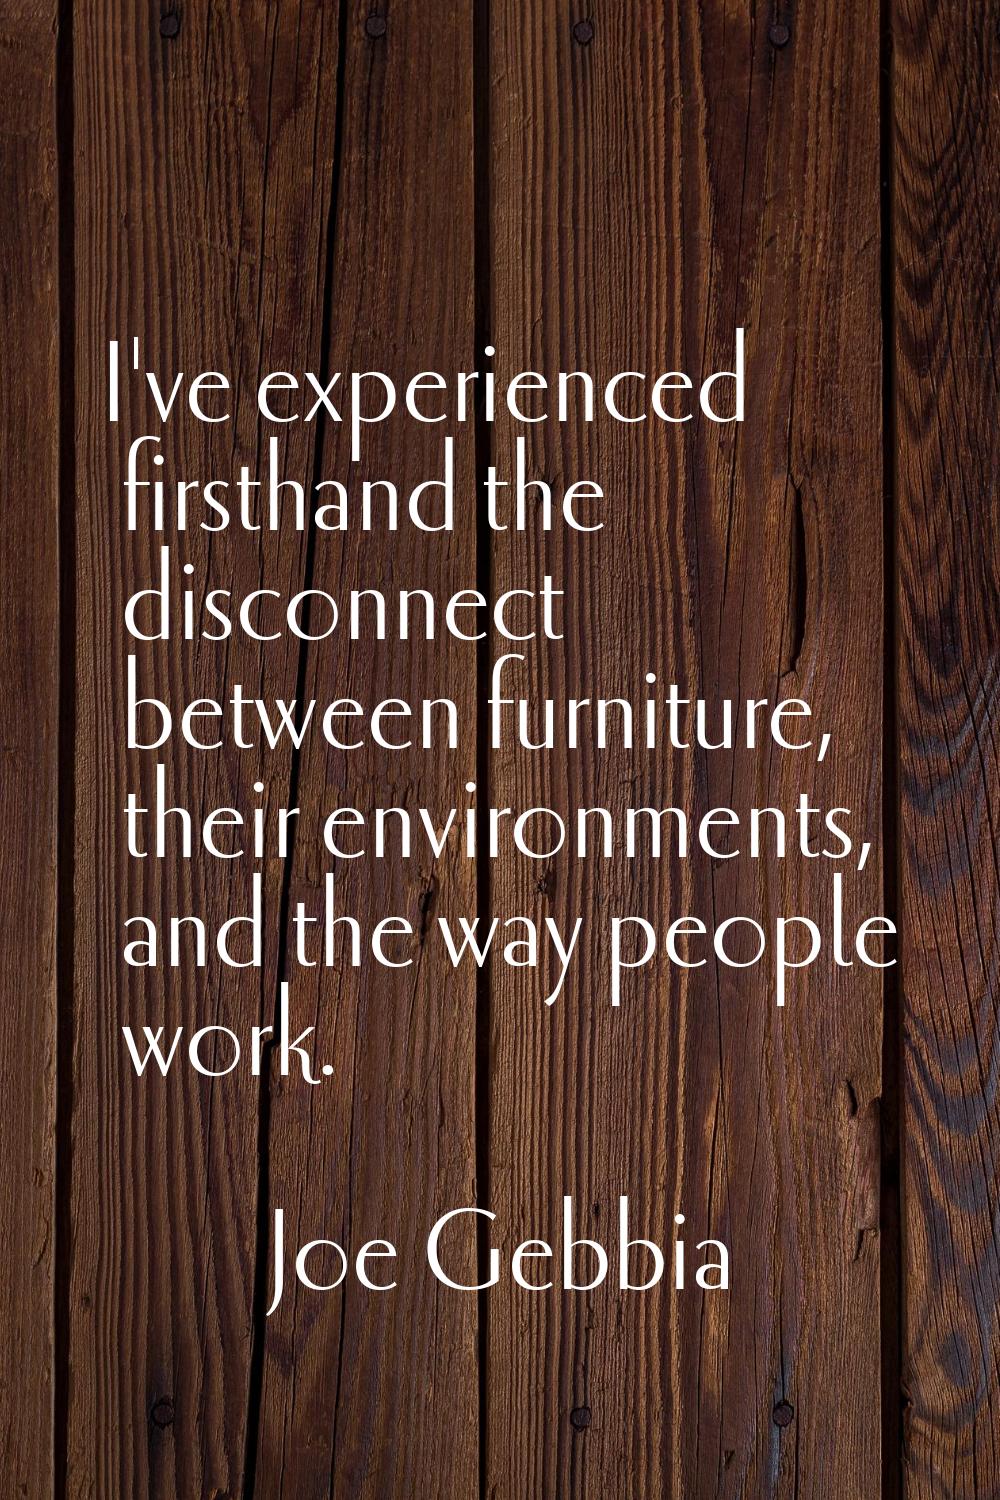 I've experienced firsthand the disconnect between furniture, their environments, and the way people